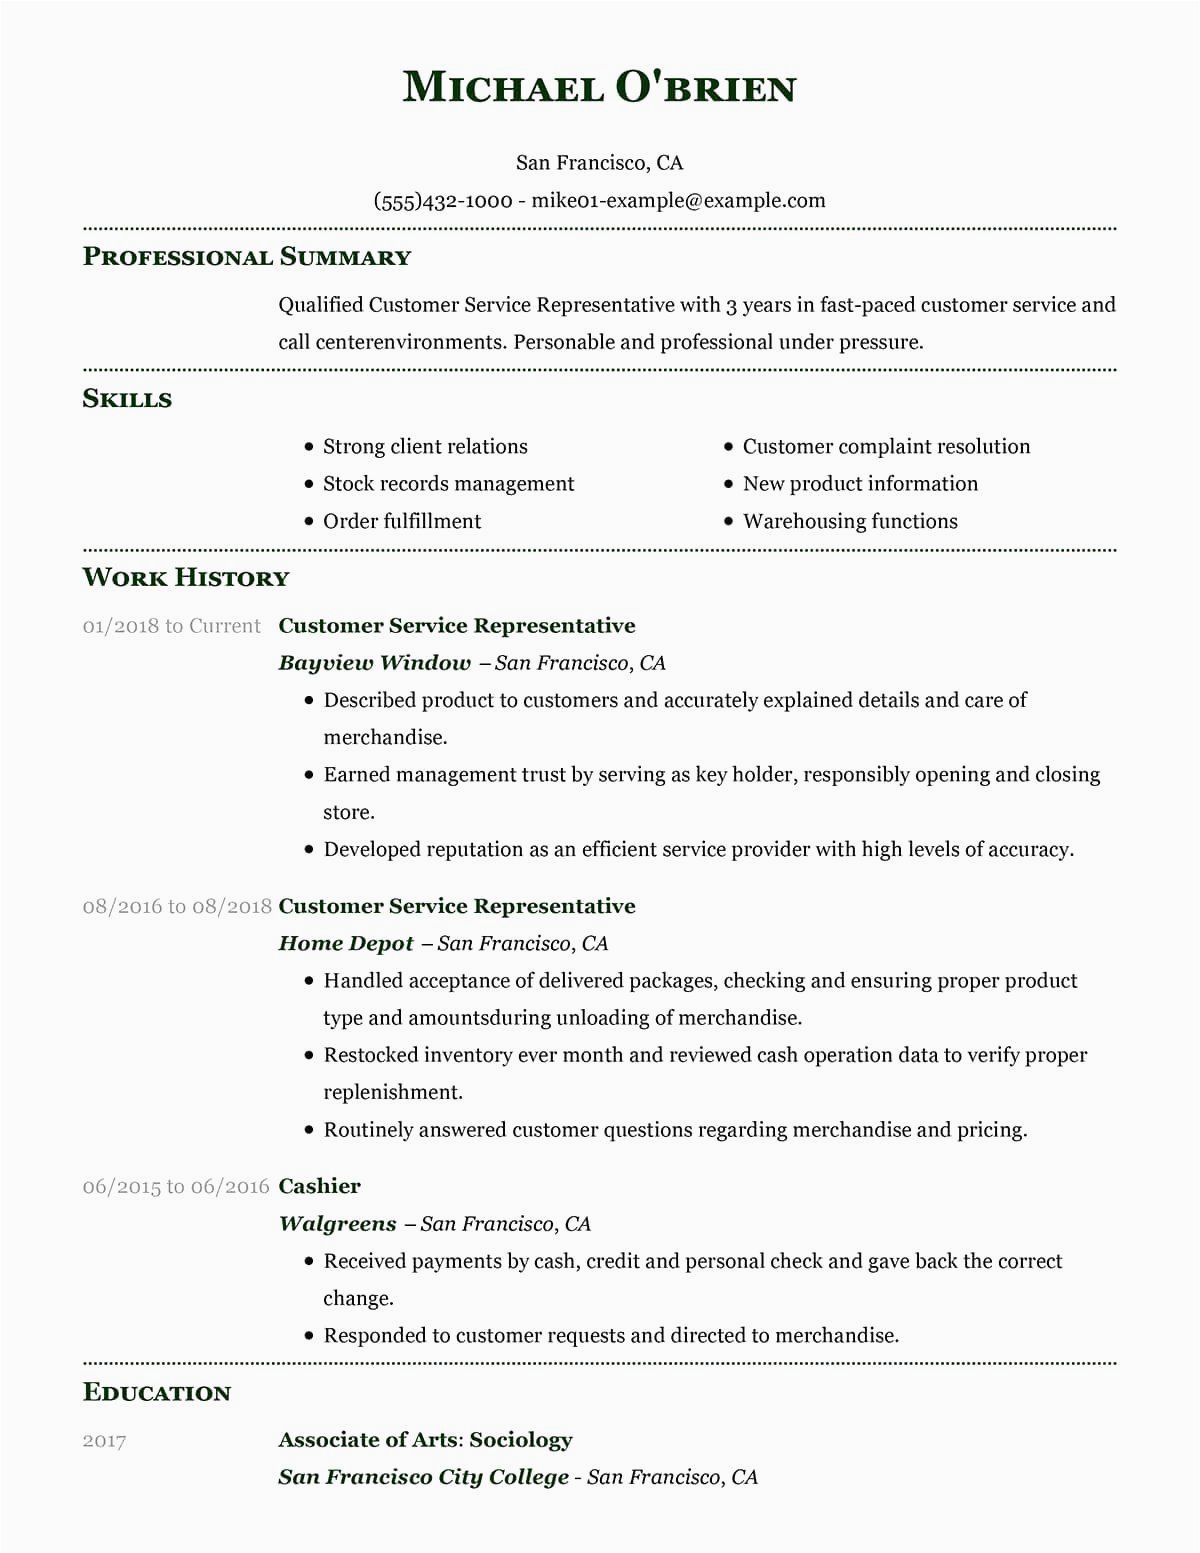 Headline or Summary for Resume Samples Strong Resume Headline Examples Elegant Strong Resume Headline Examples